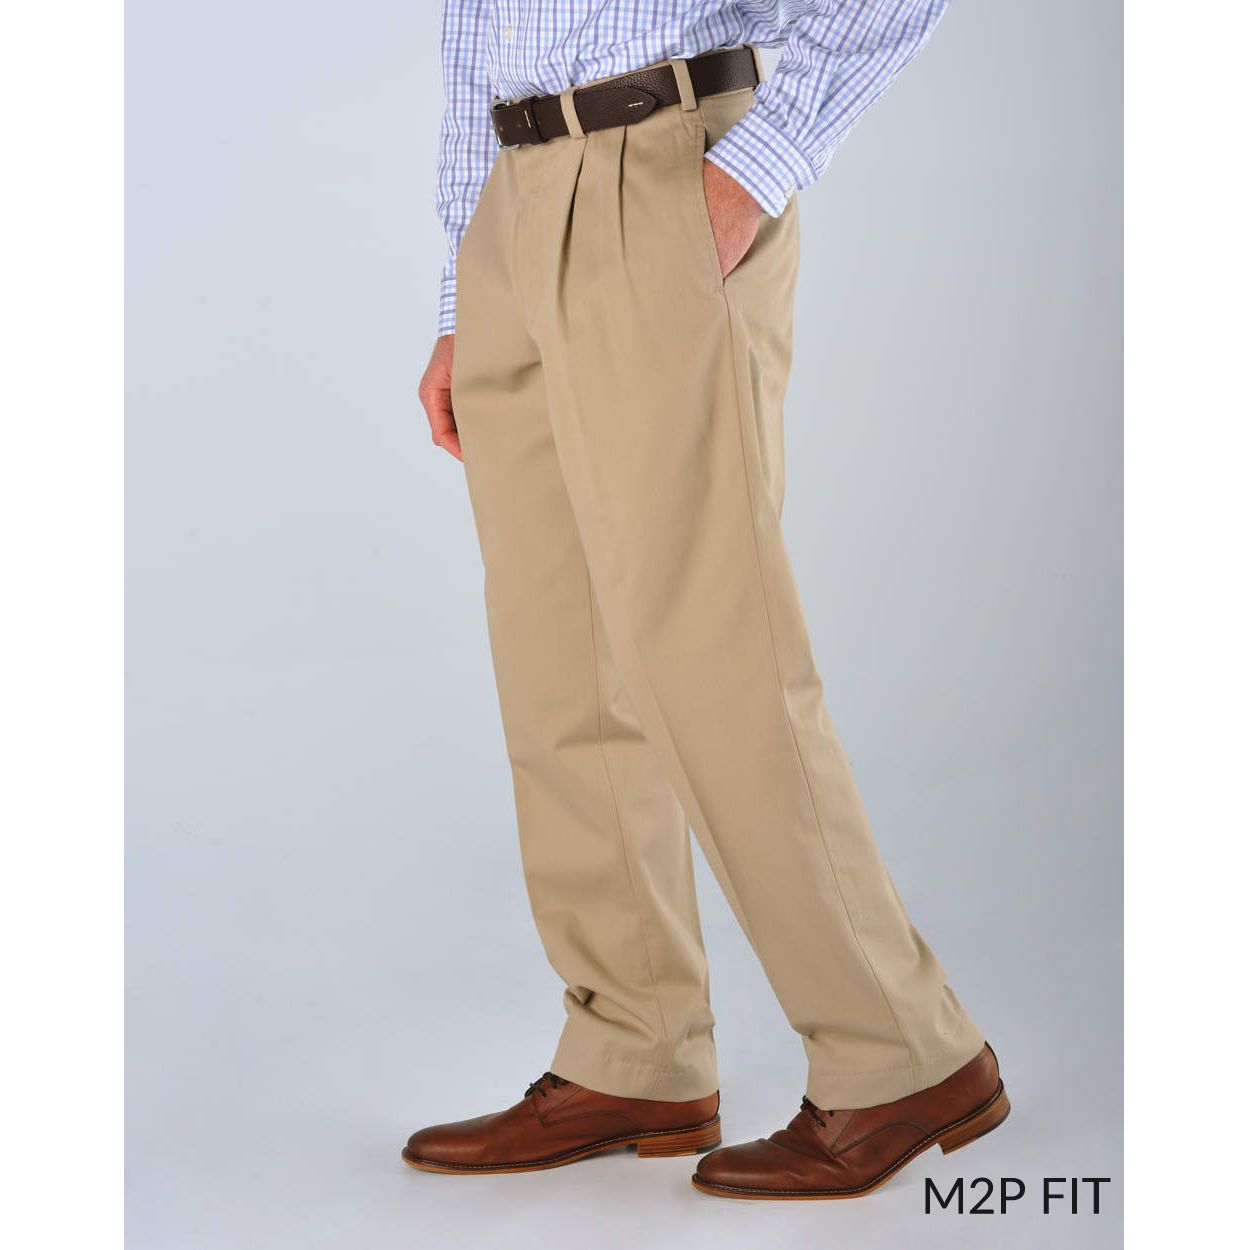 M2P Pleated Classic Fit Vintage Twills in Stone by Bills Khakis